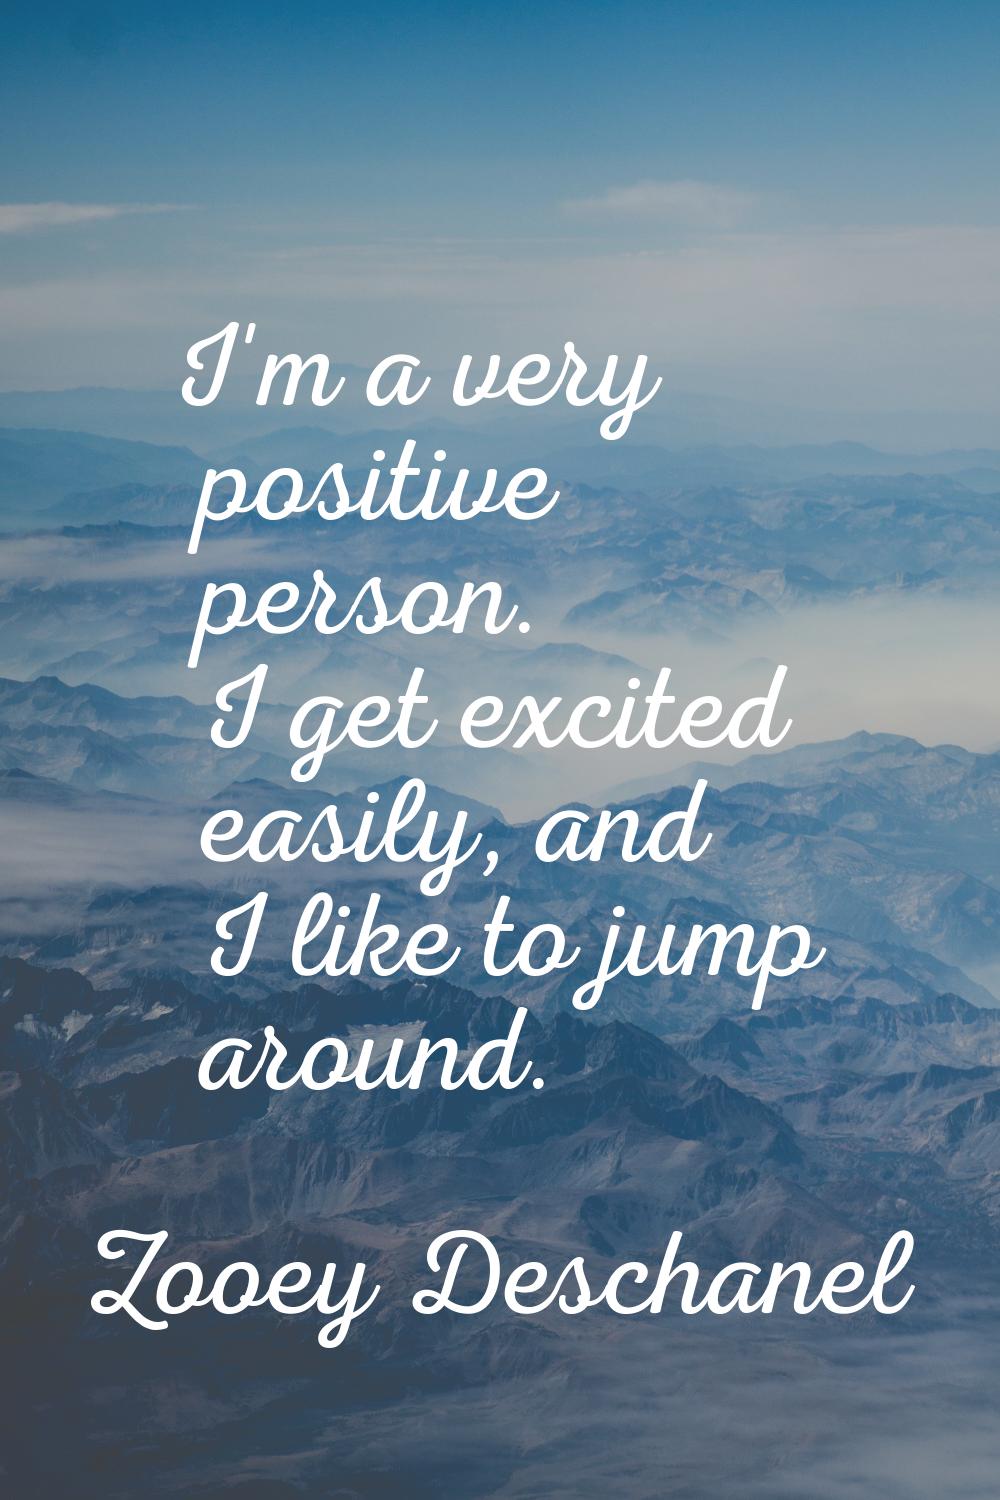 I'm a very positive person. I get excited easily, and I like to jump around.